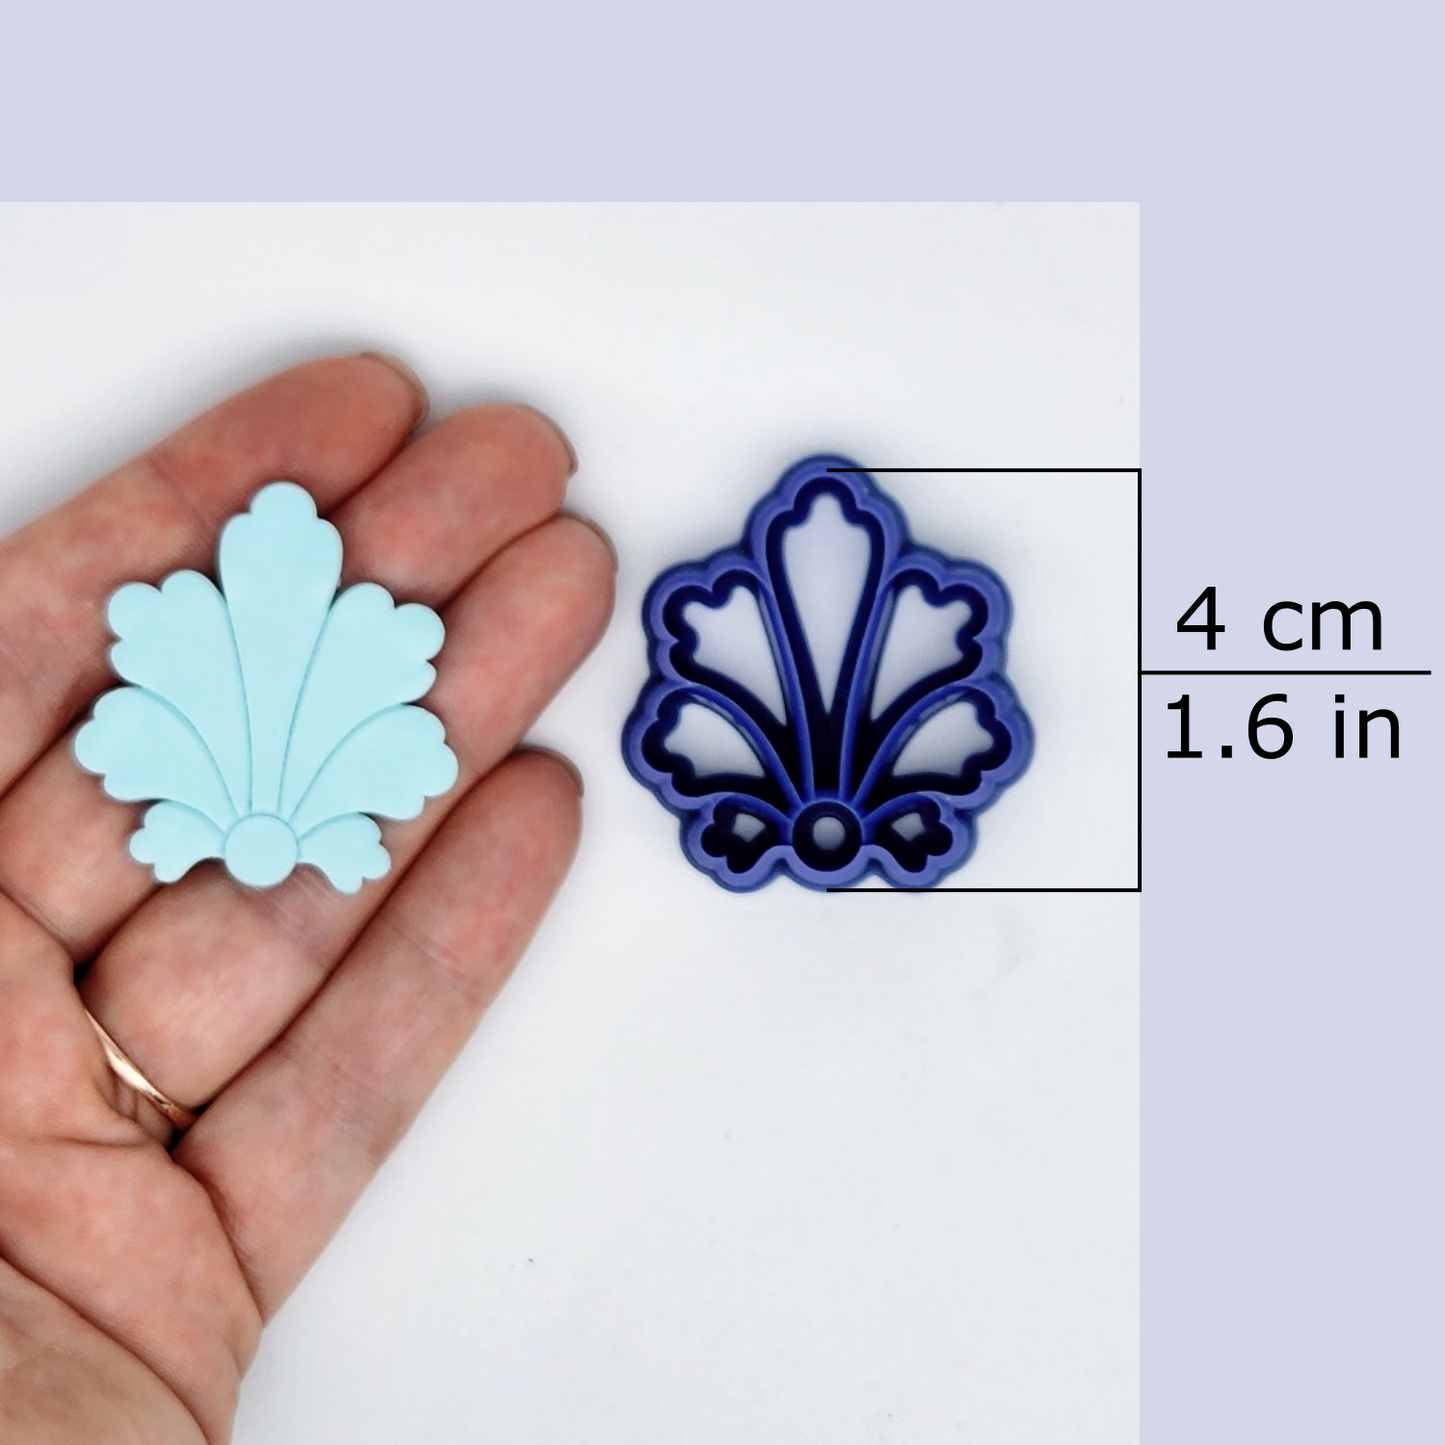 Filigree flower debossing clay cutter available size, 4 centimeters / 1.6 inches